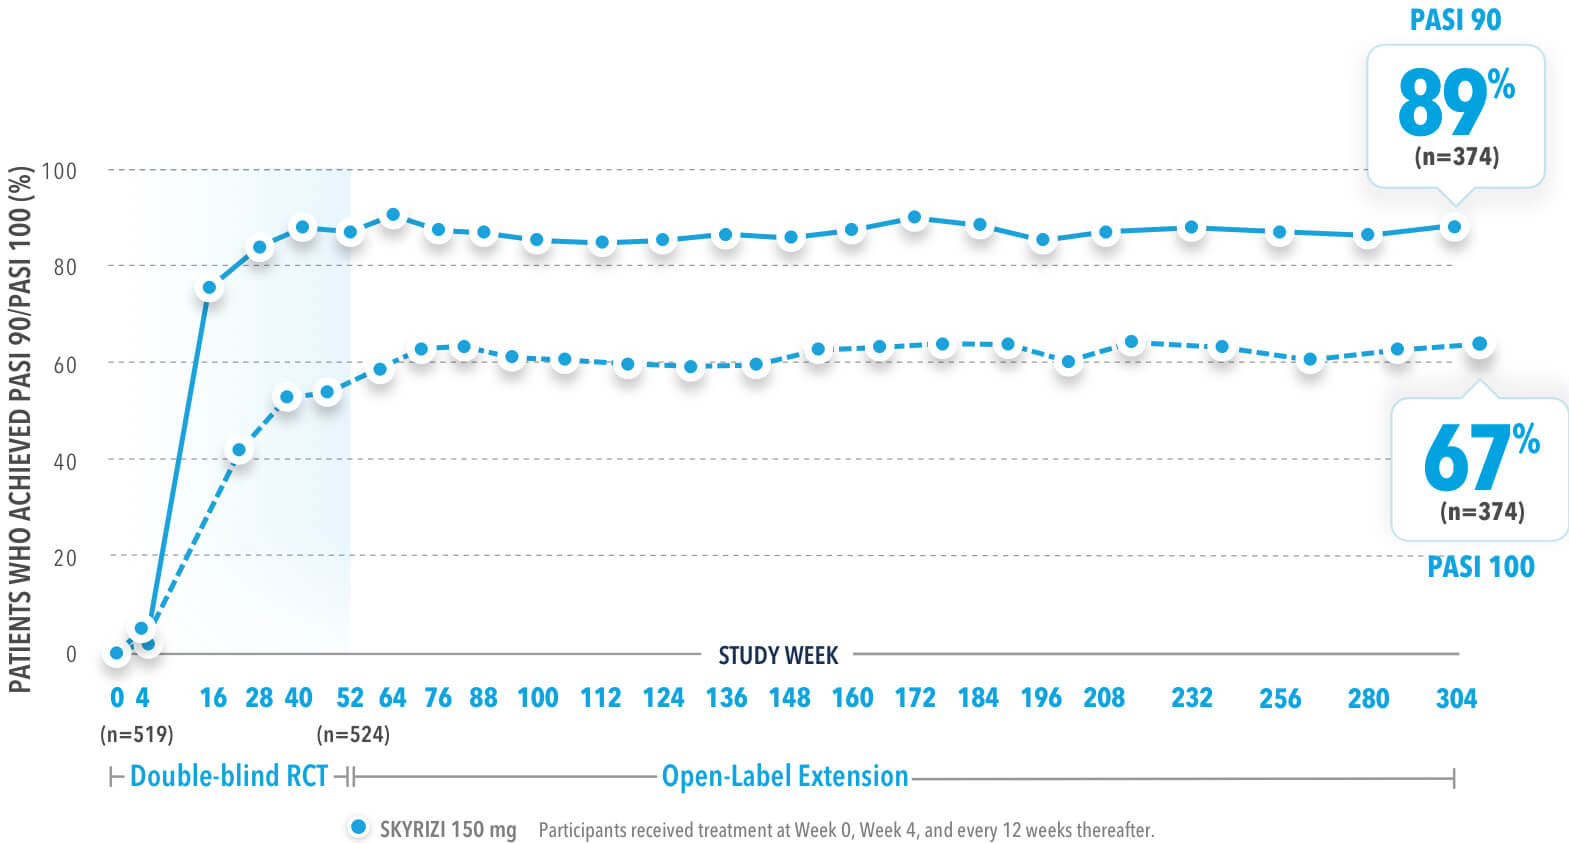 PASI 90 and PASI 100 achievement at week 304 in the open-label extension (OLE).